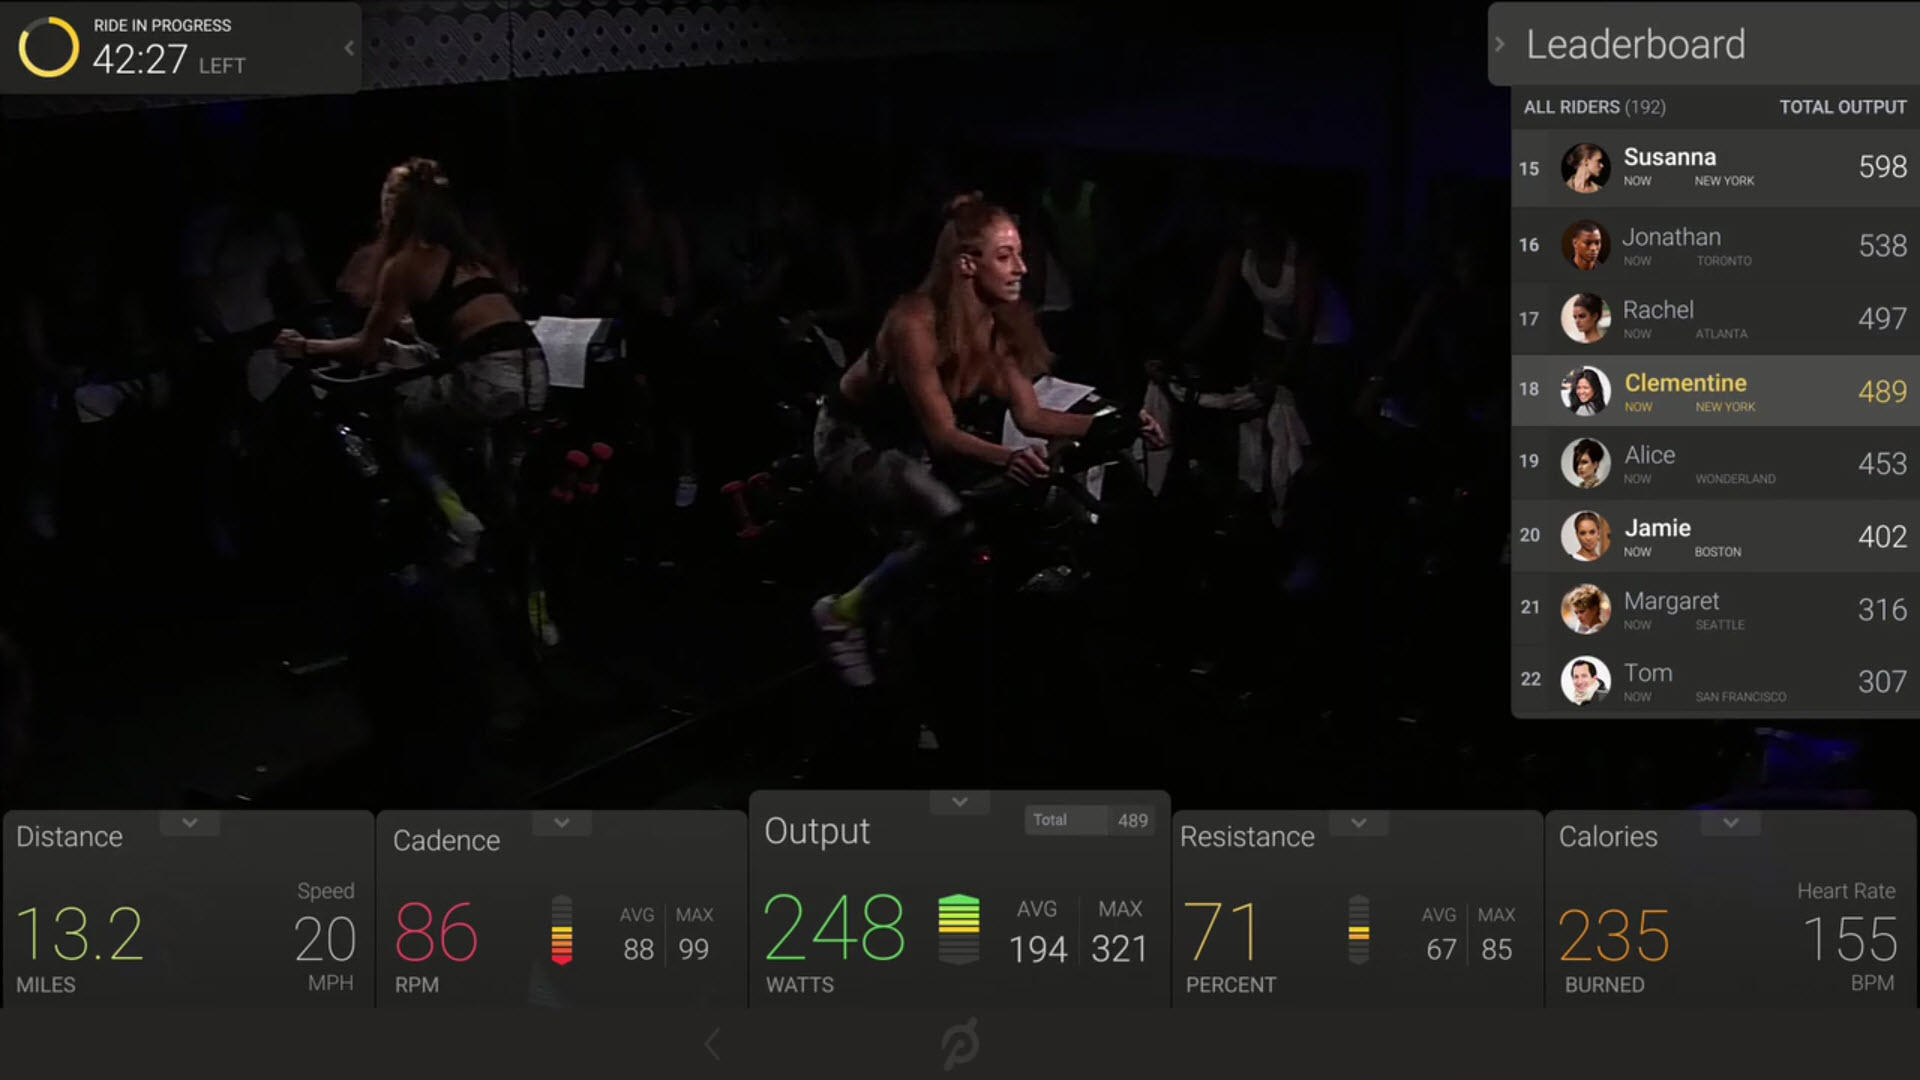 Peloton tablet UI display during a live class. Click to enlarge.